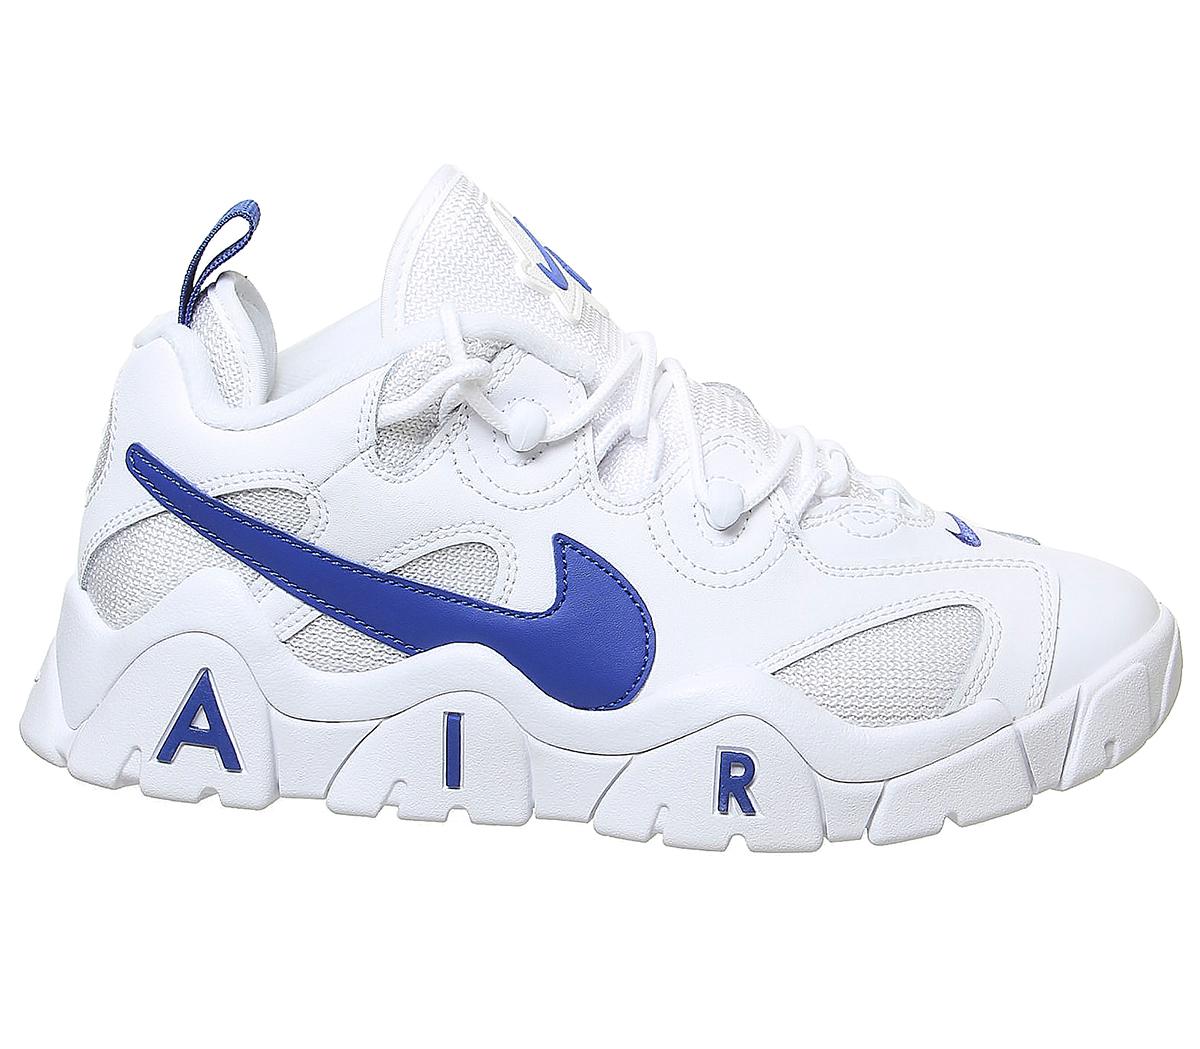 Nike Air Barrage Low Trainers White Hyper Blue - Unisex Sports